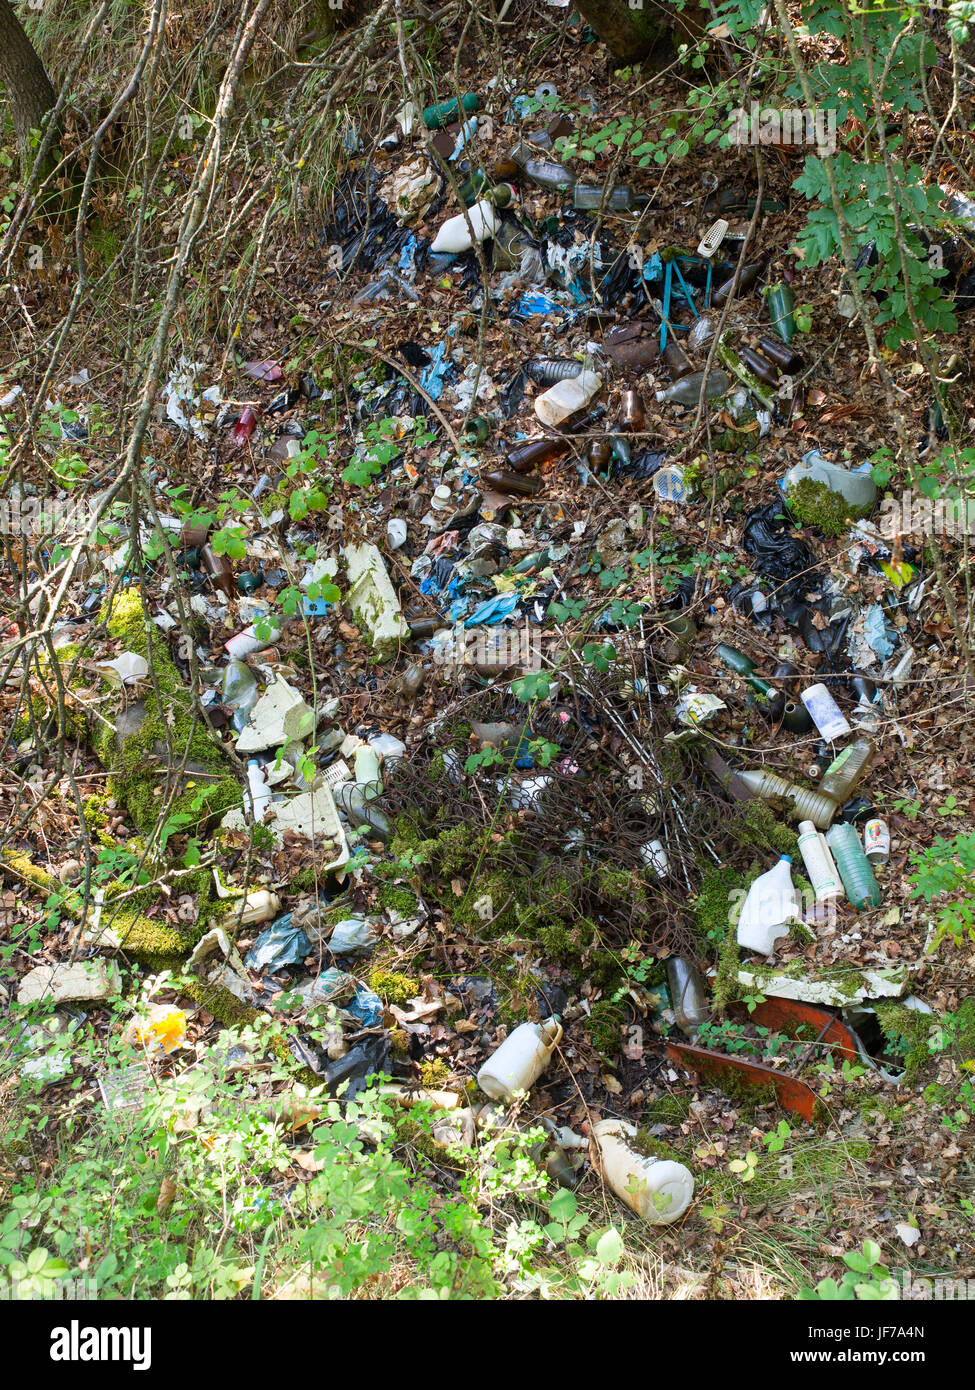 plastic metal and glass garbage scattered in the nature Stock Photo